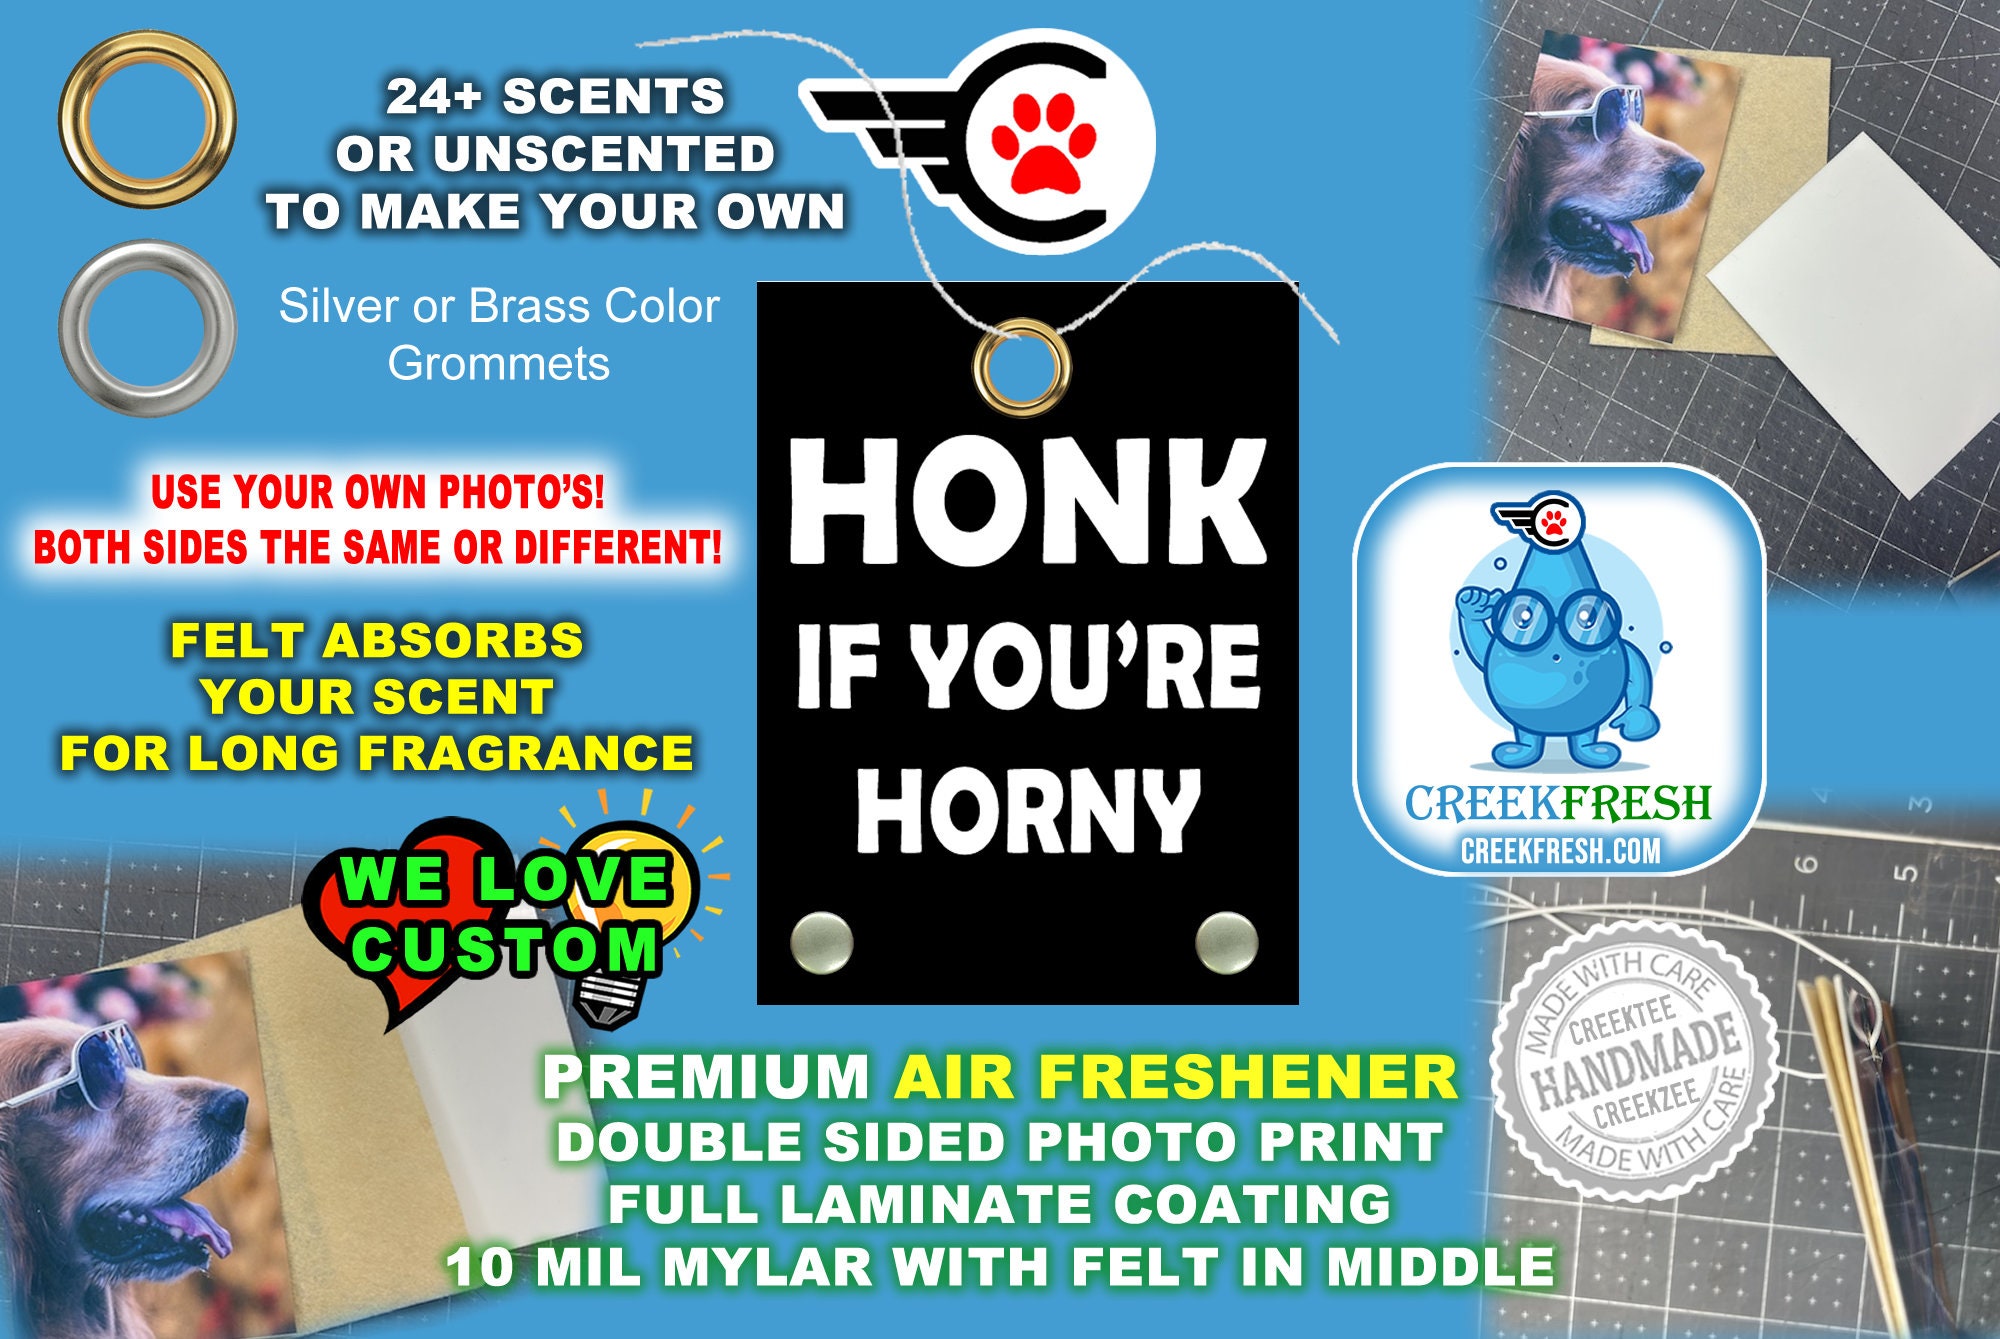 Honk If You're Horny - Premium Air Freshener Color Photo Print with Felt middle for fragrance absorption -Scented or un-Scented - Dbl Sided